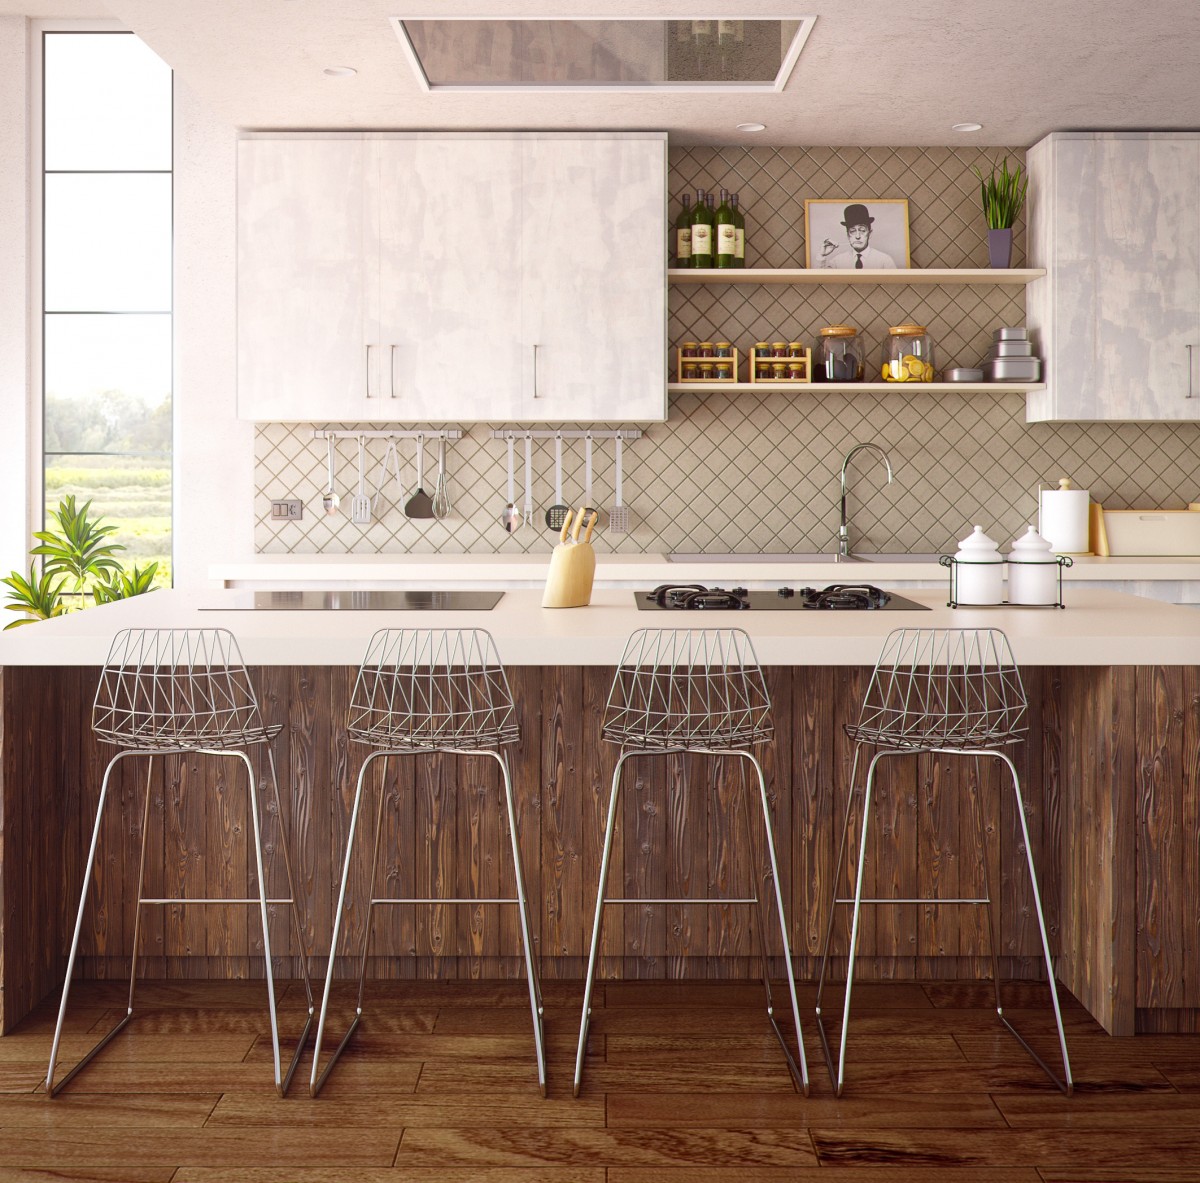 Rating of the best kitchen tiles for 2022